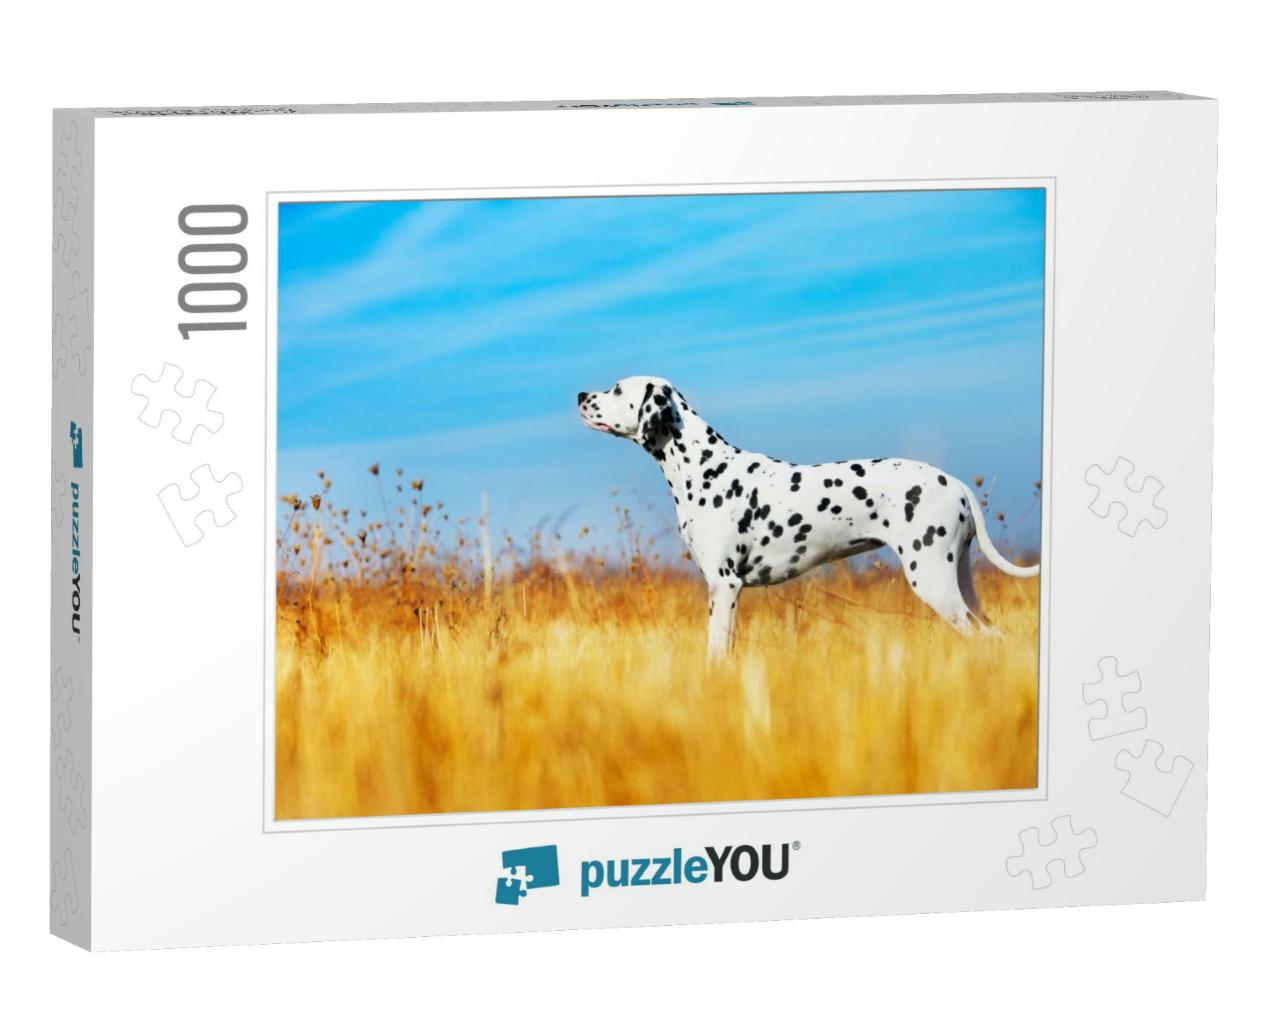 Beautiful Dalmatian Dog in a Field... Jigsaw Puzzle with 1000 pieces